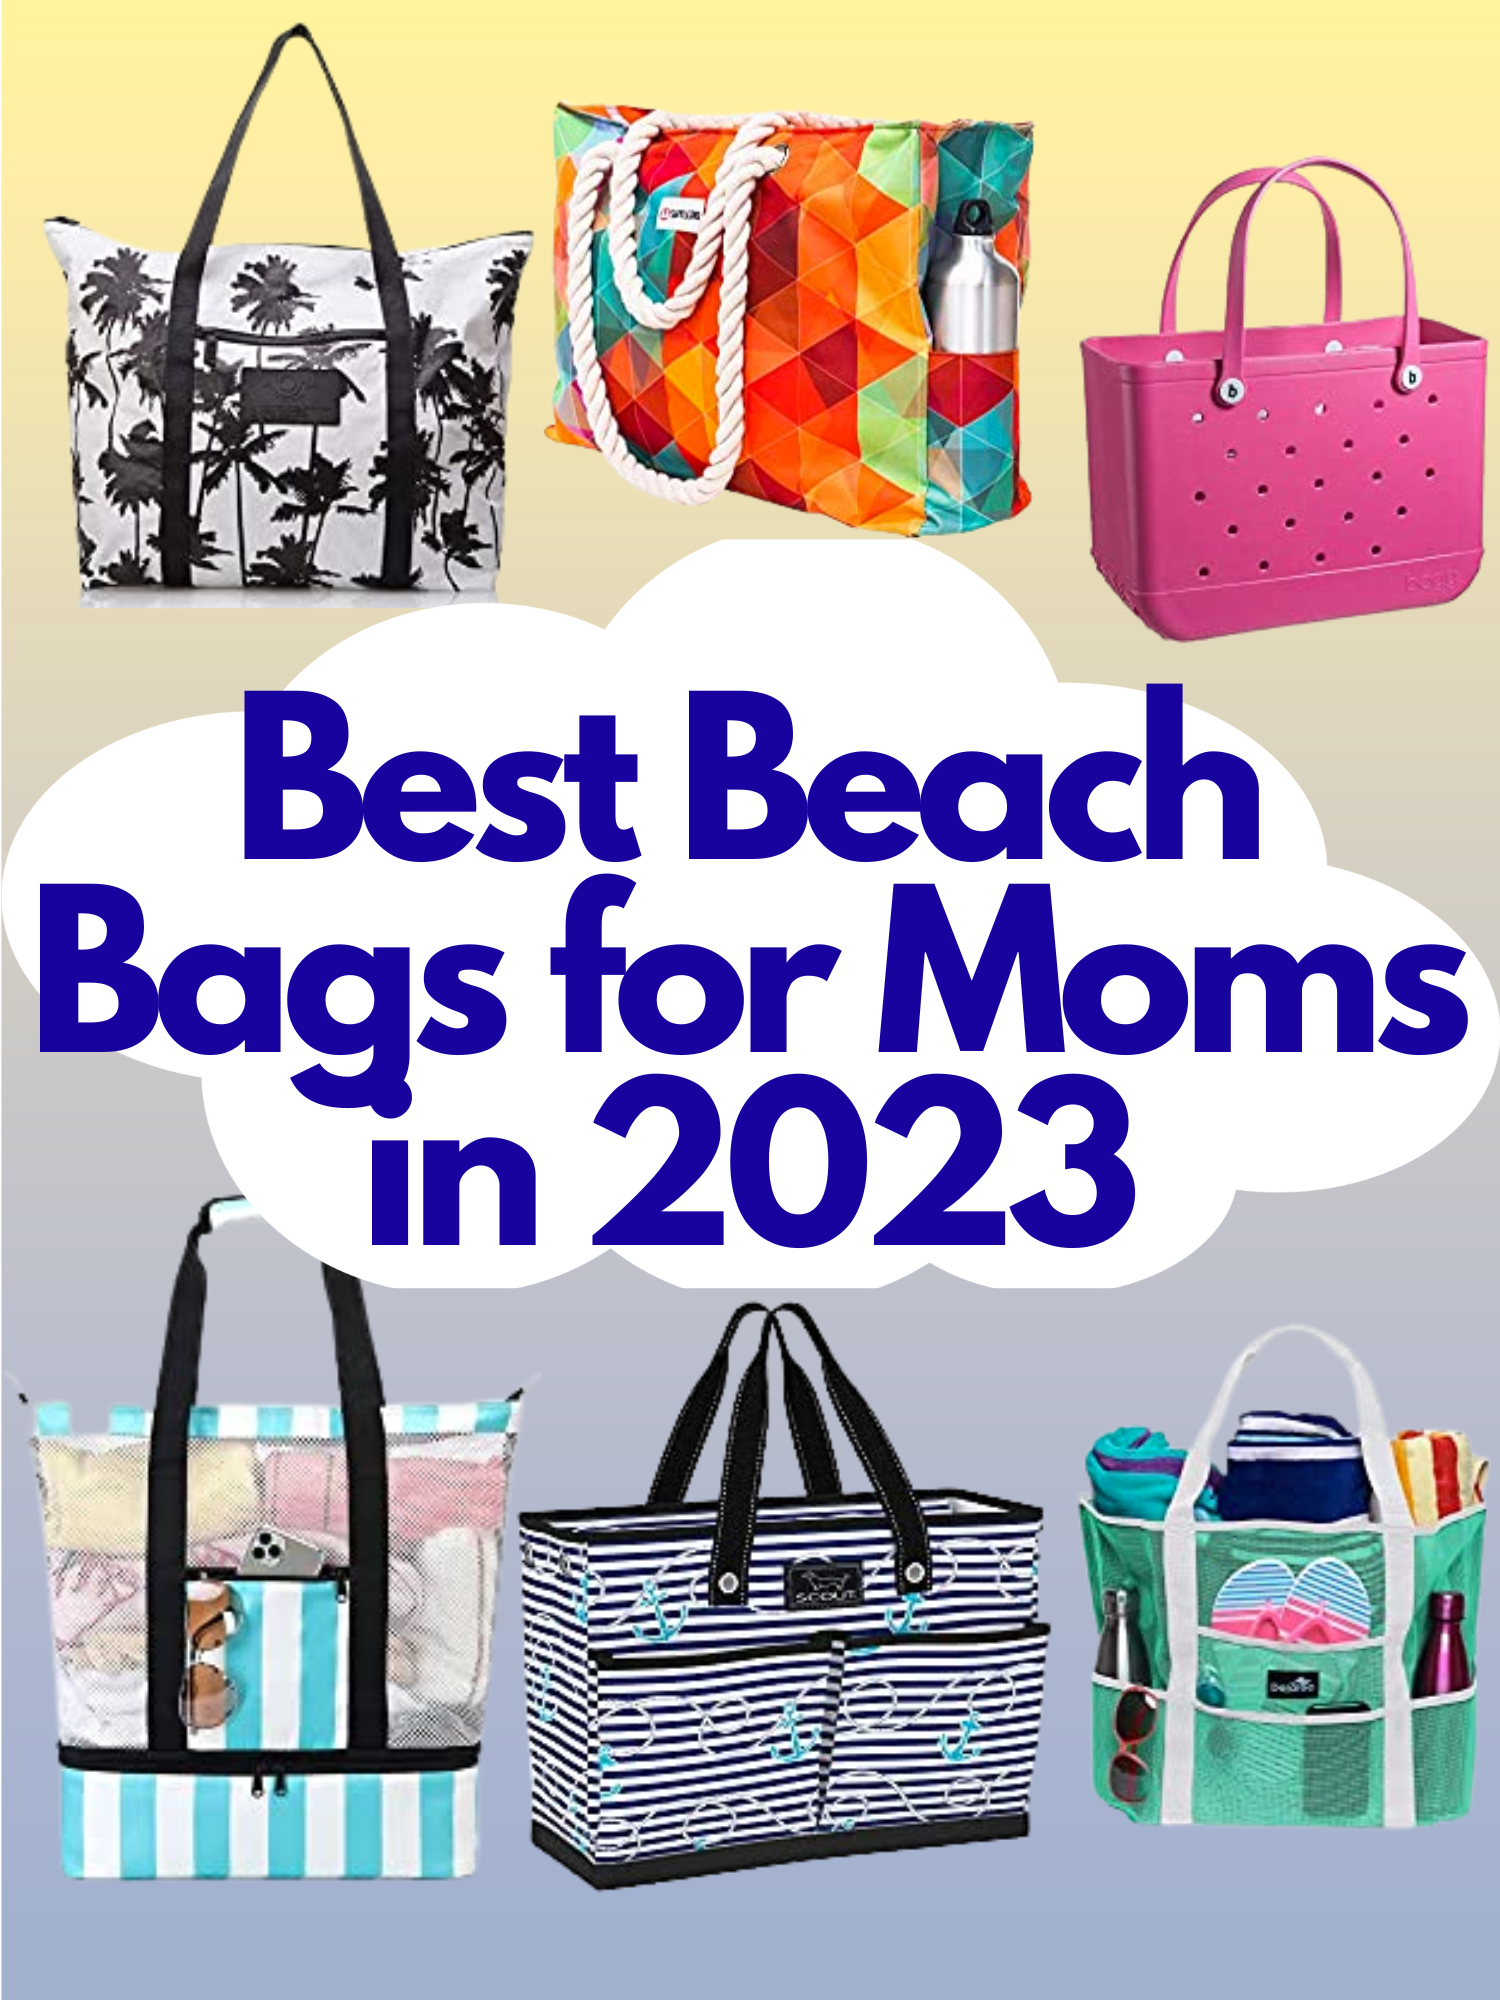 Best Beach Bags for Moms in 2023 - Spicy Meatball Mama